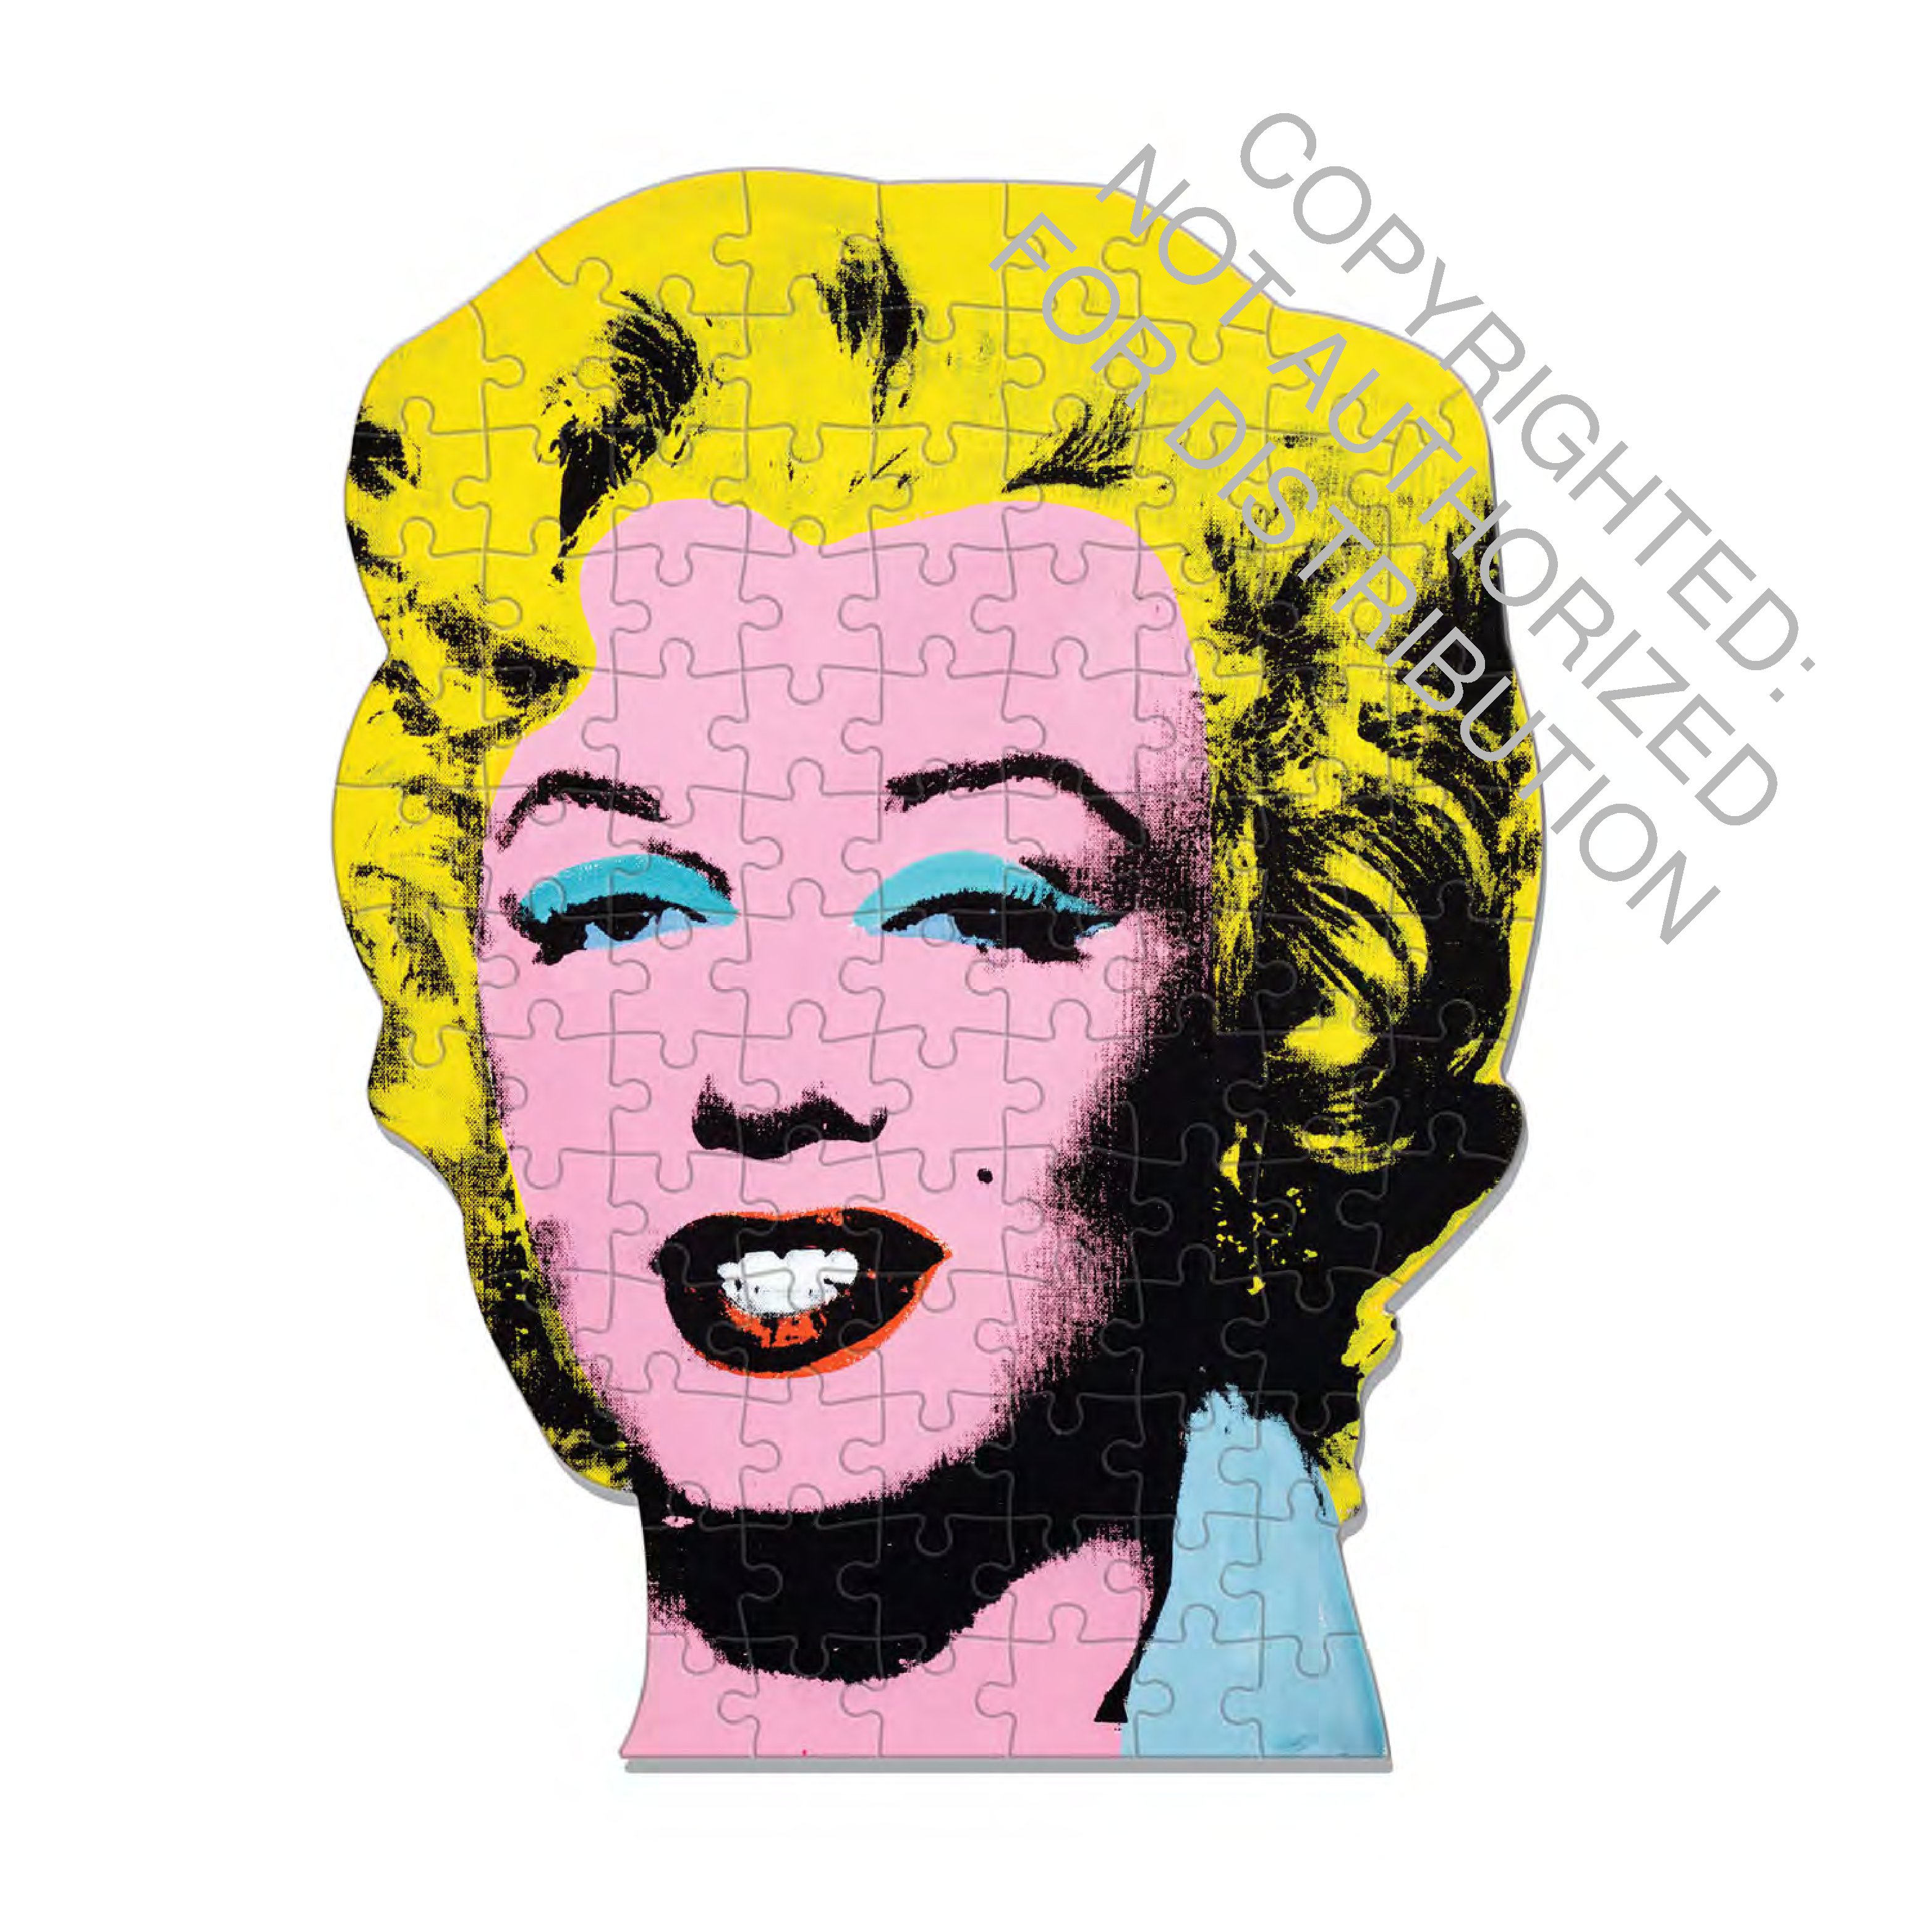 Andy Warhol Mini Shaped Puzzle Marilyn